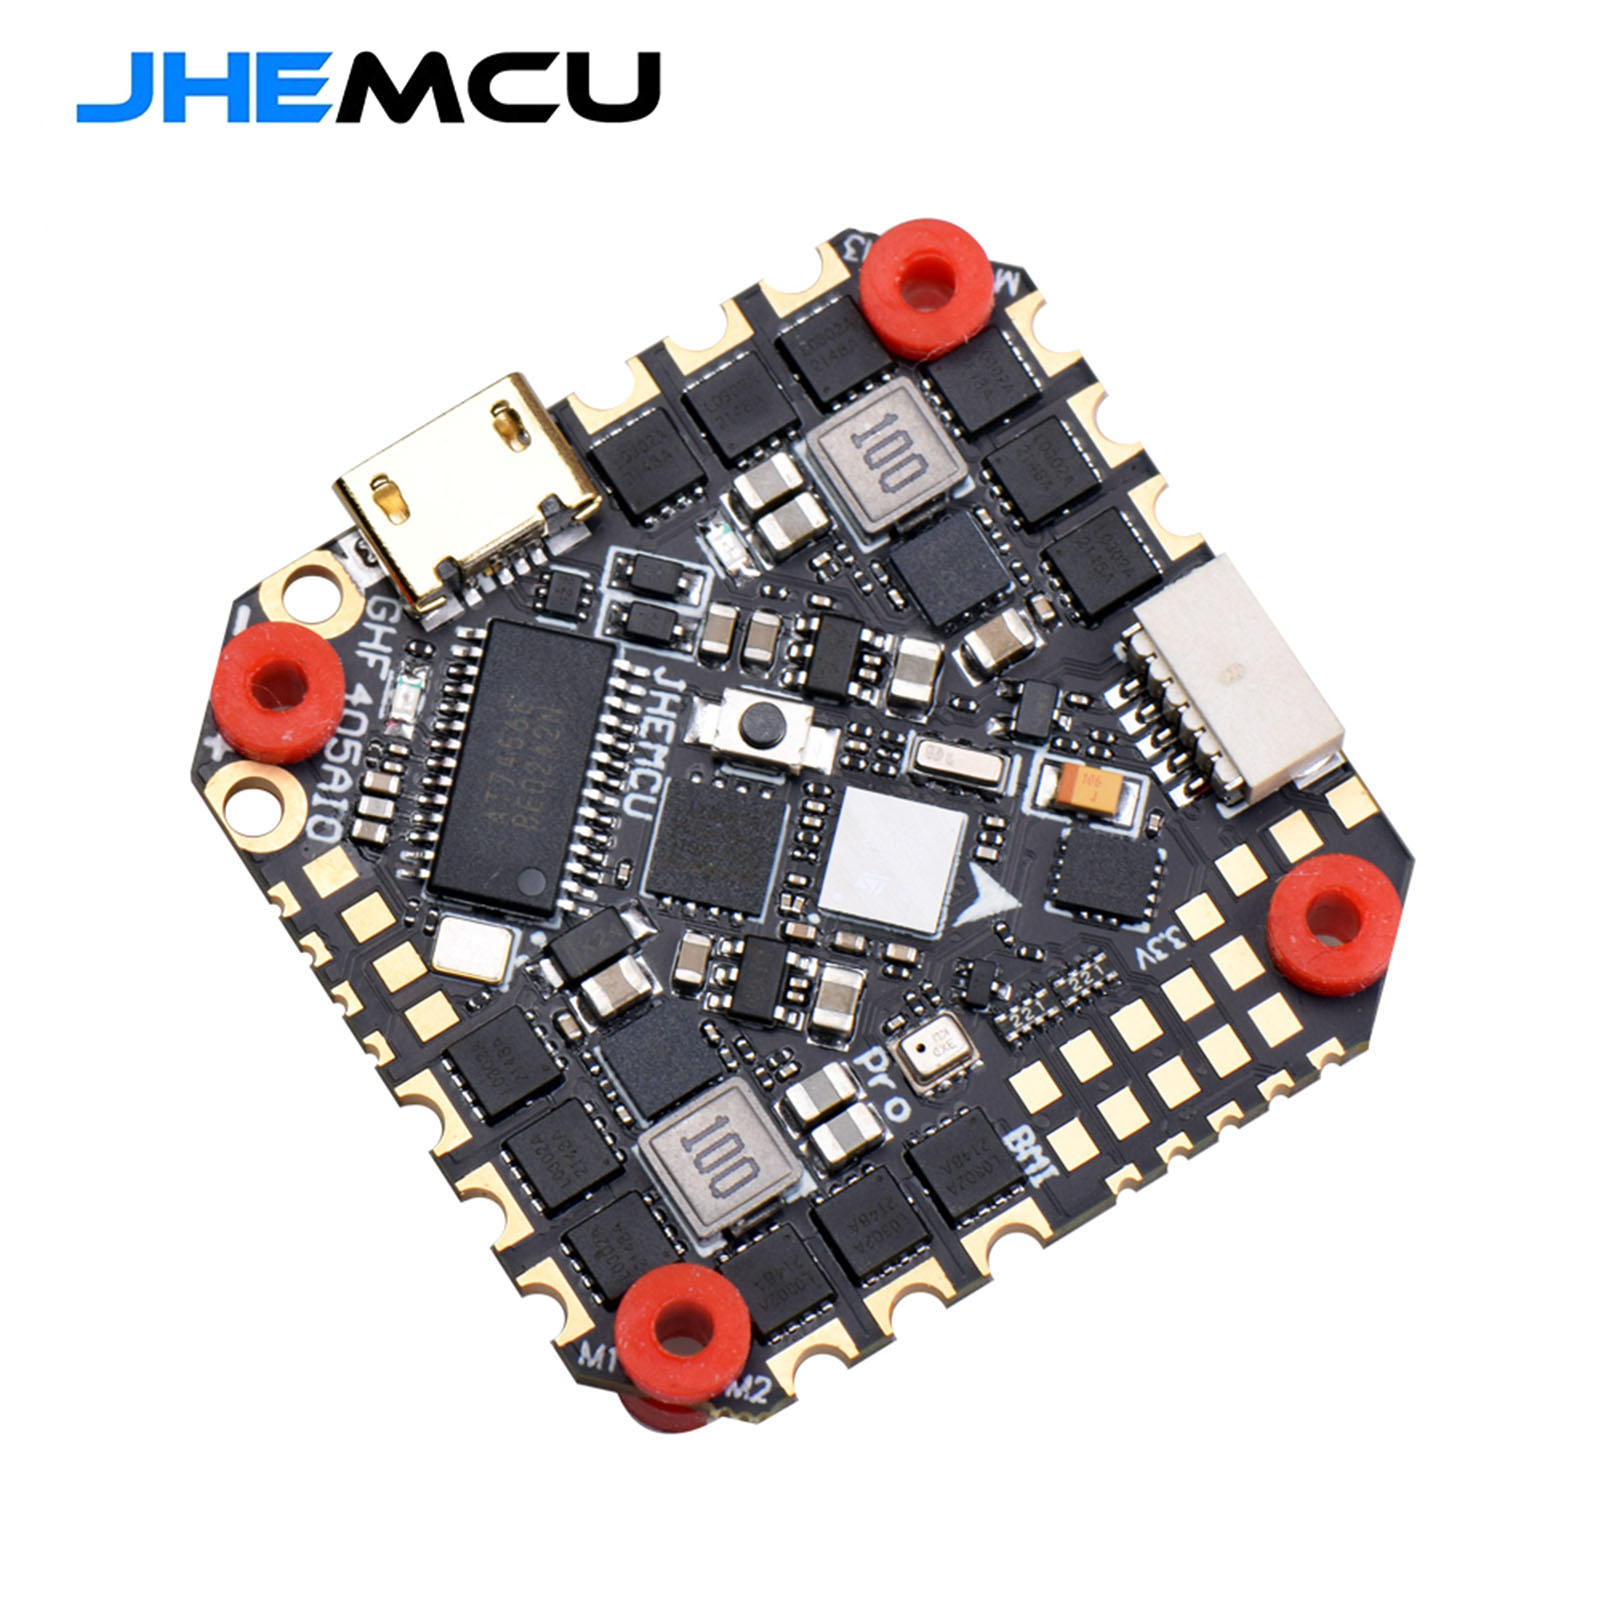 JHEMCU GHF405AIO-BMI F405 Flight Controller W5V 10V BEC Built-in 40A BLHELI_S 2-6S 4 in 1 ESC 25.5X25.5mm for - image 5 of 7